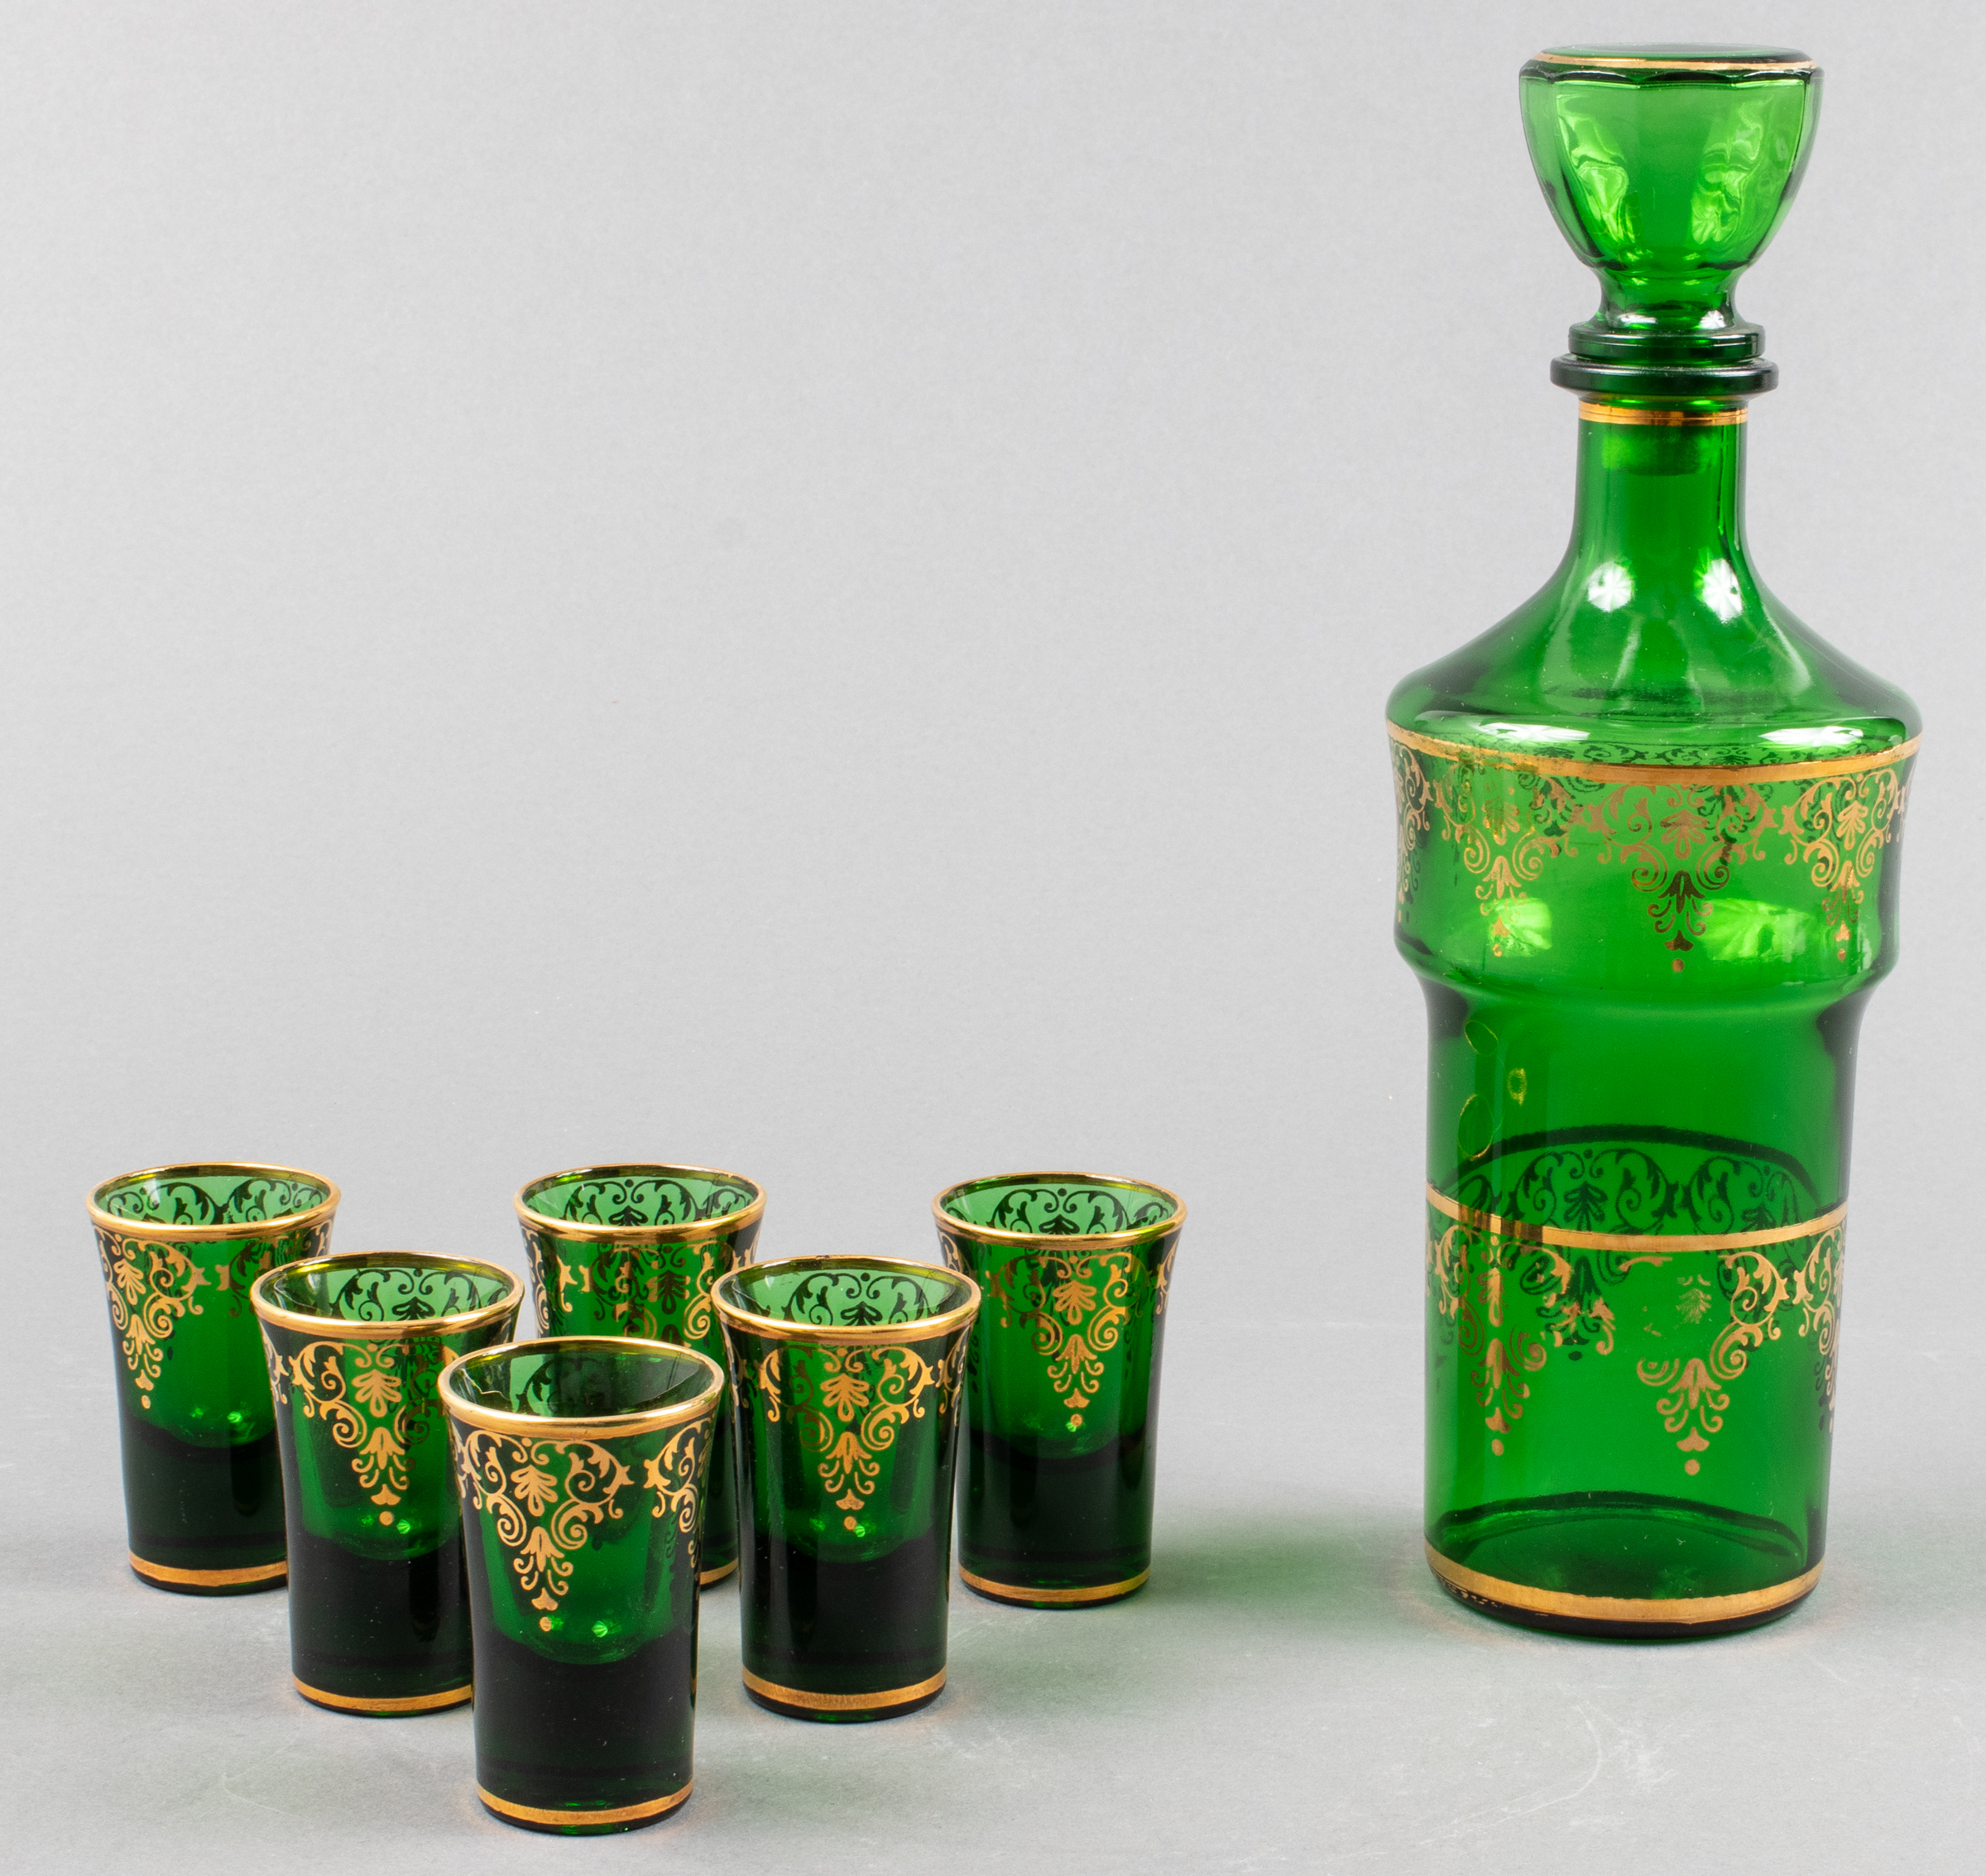 GREEN GLASS DECANTER WITH SIX GLASSES  3c36b9